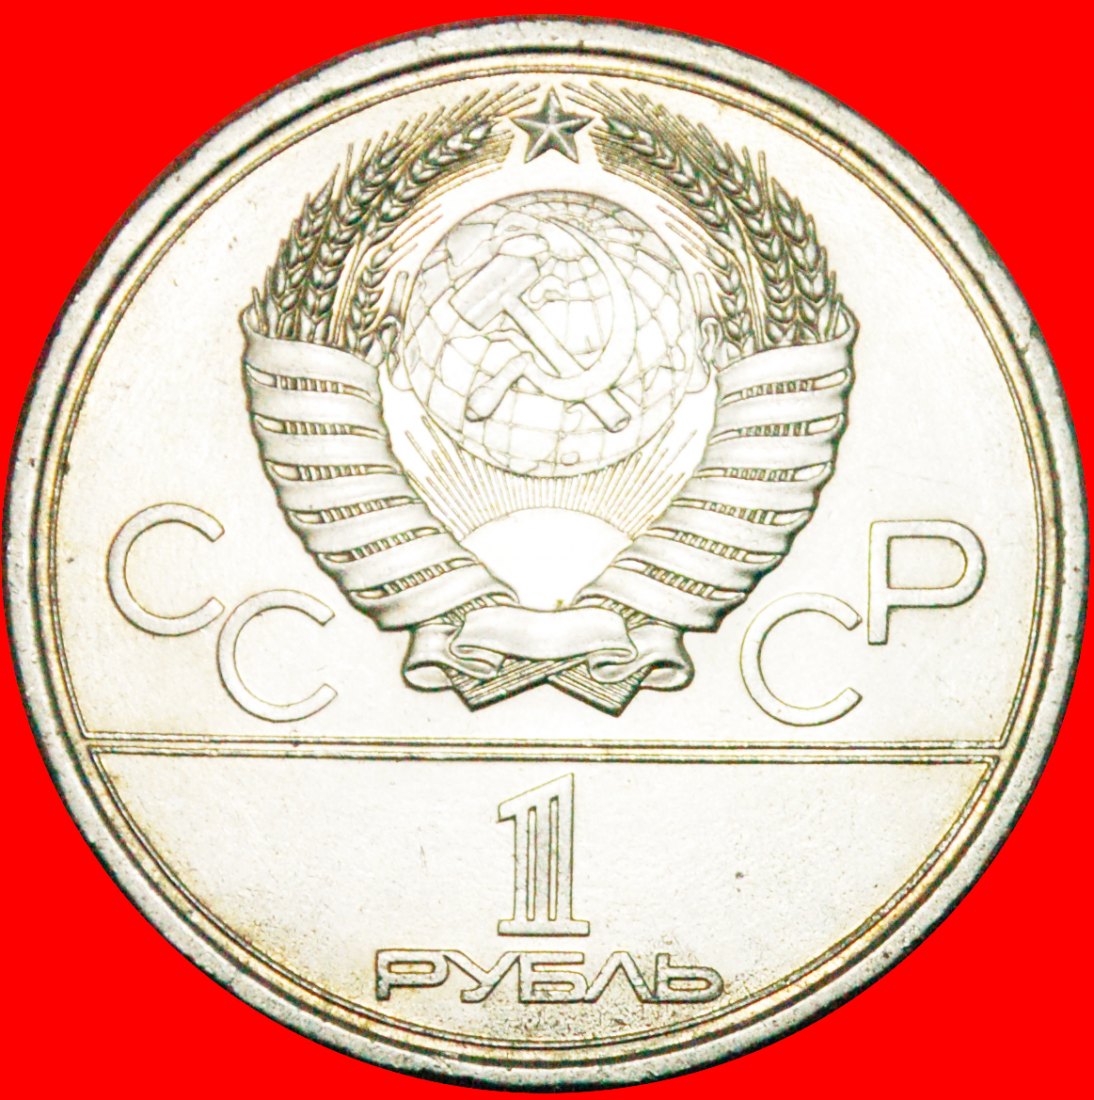  § OLYMPICS 1980: USSR (ex. russia) ★ 1 ROUBLE 1979! STALIN'S (1878-1953) PEDESTAL!   